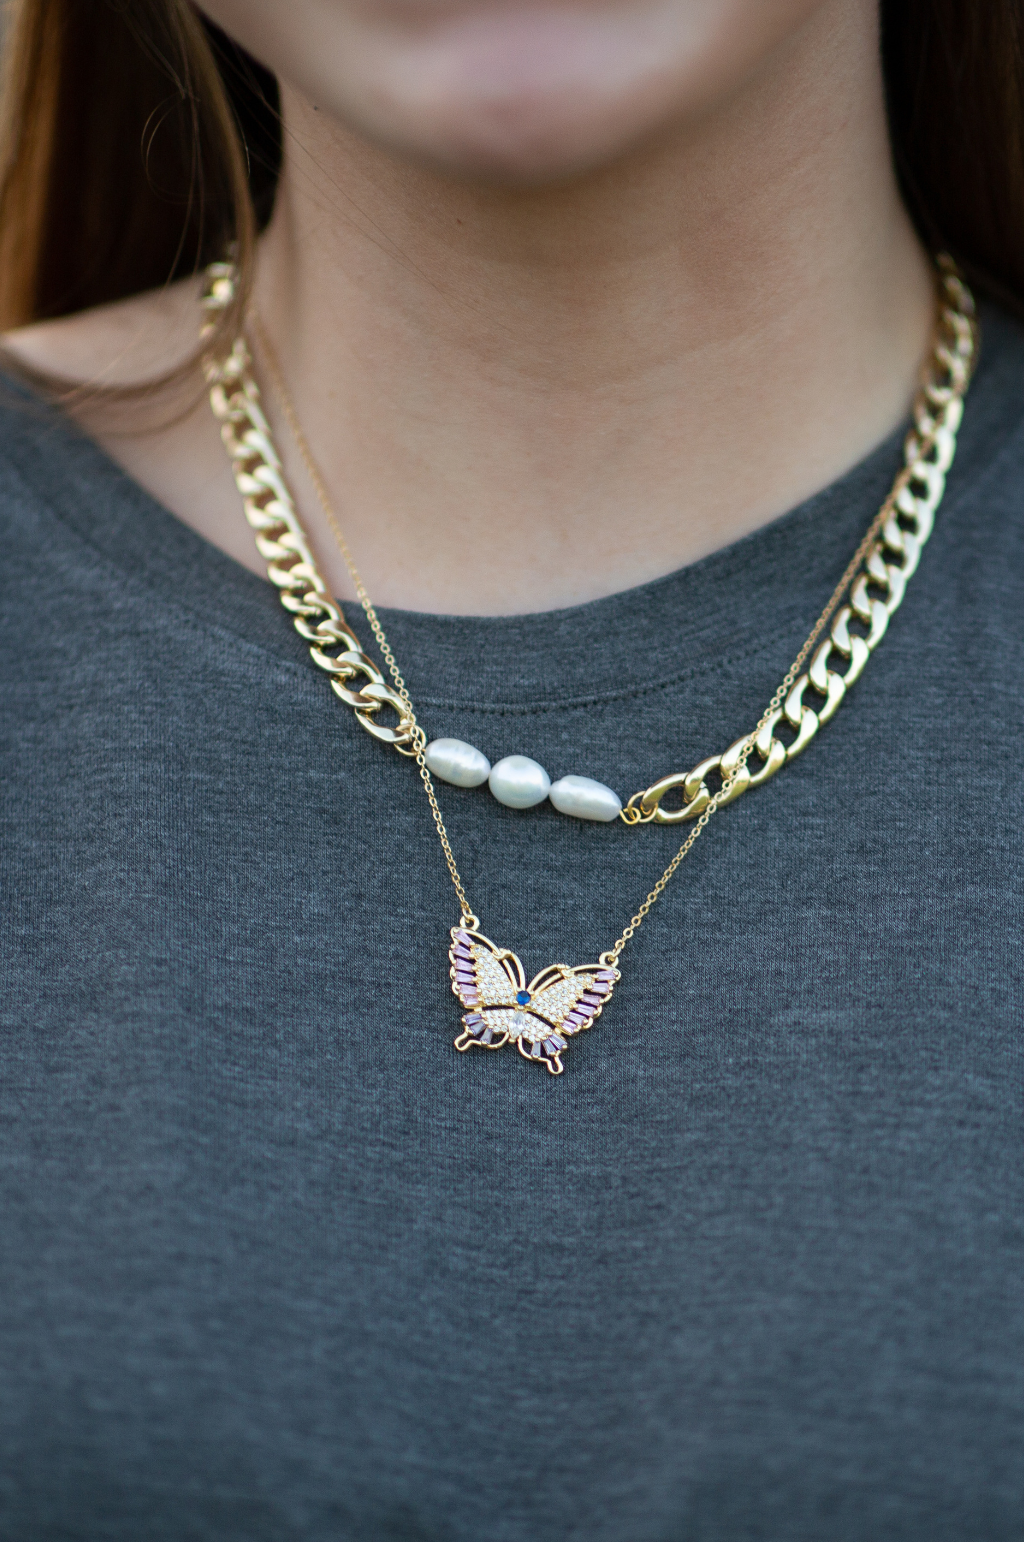 The 310 BAM Necklace by Annie Claire Designs - SoSis